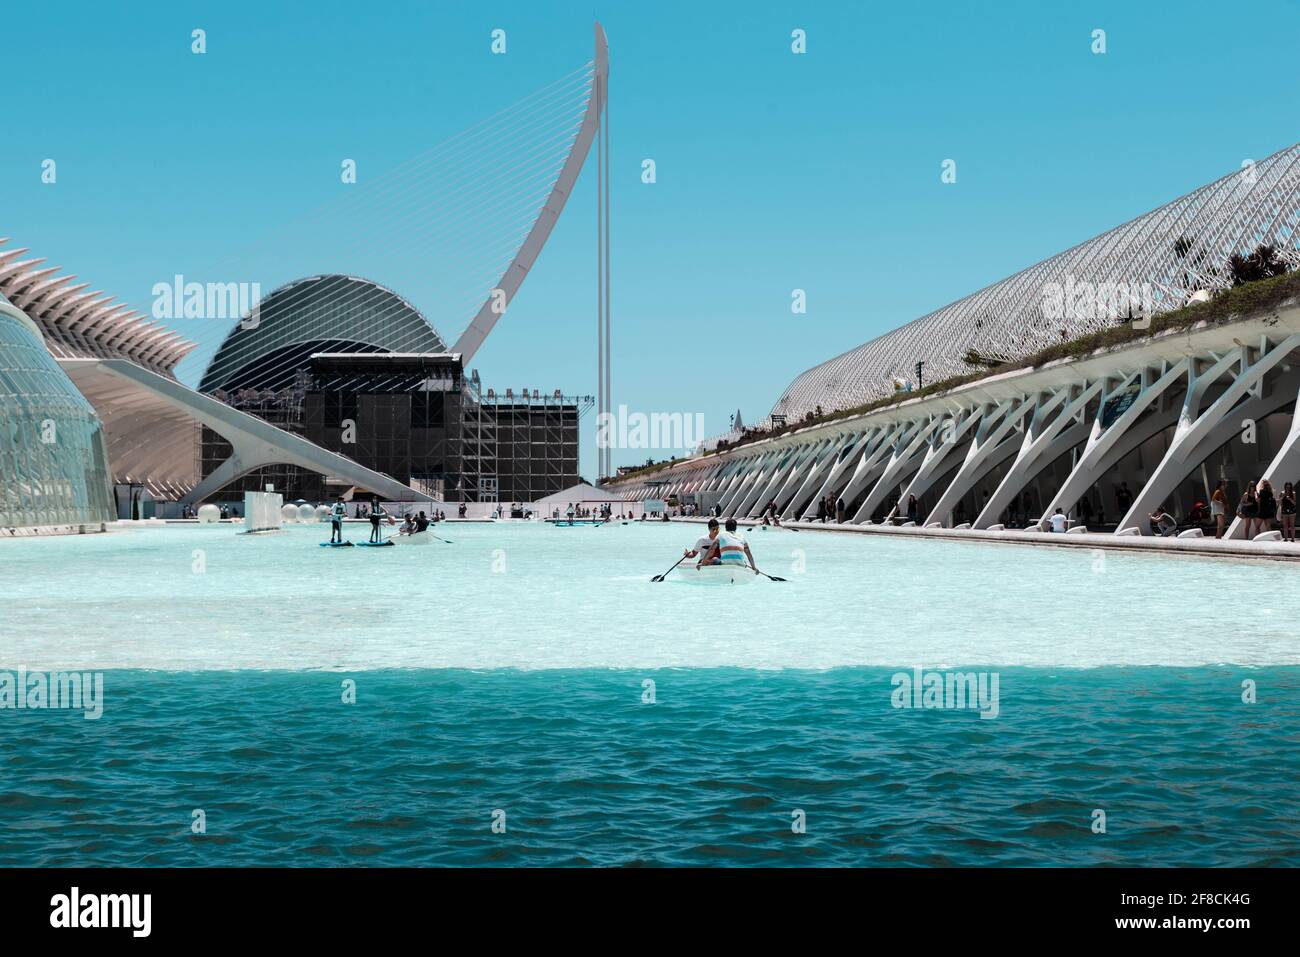 People enjoying the boats on the artificial lake in front of the Palau de les Arts in the City of Arts and Sciences, Valencia, Spain. Stock Photo